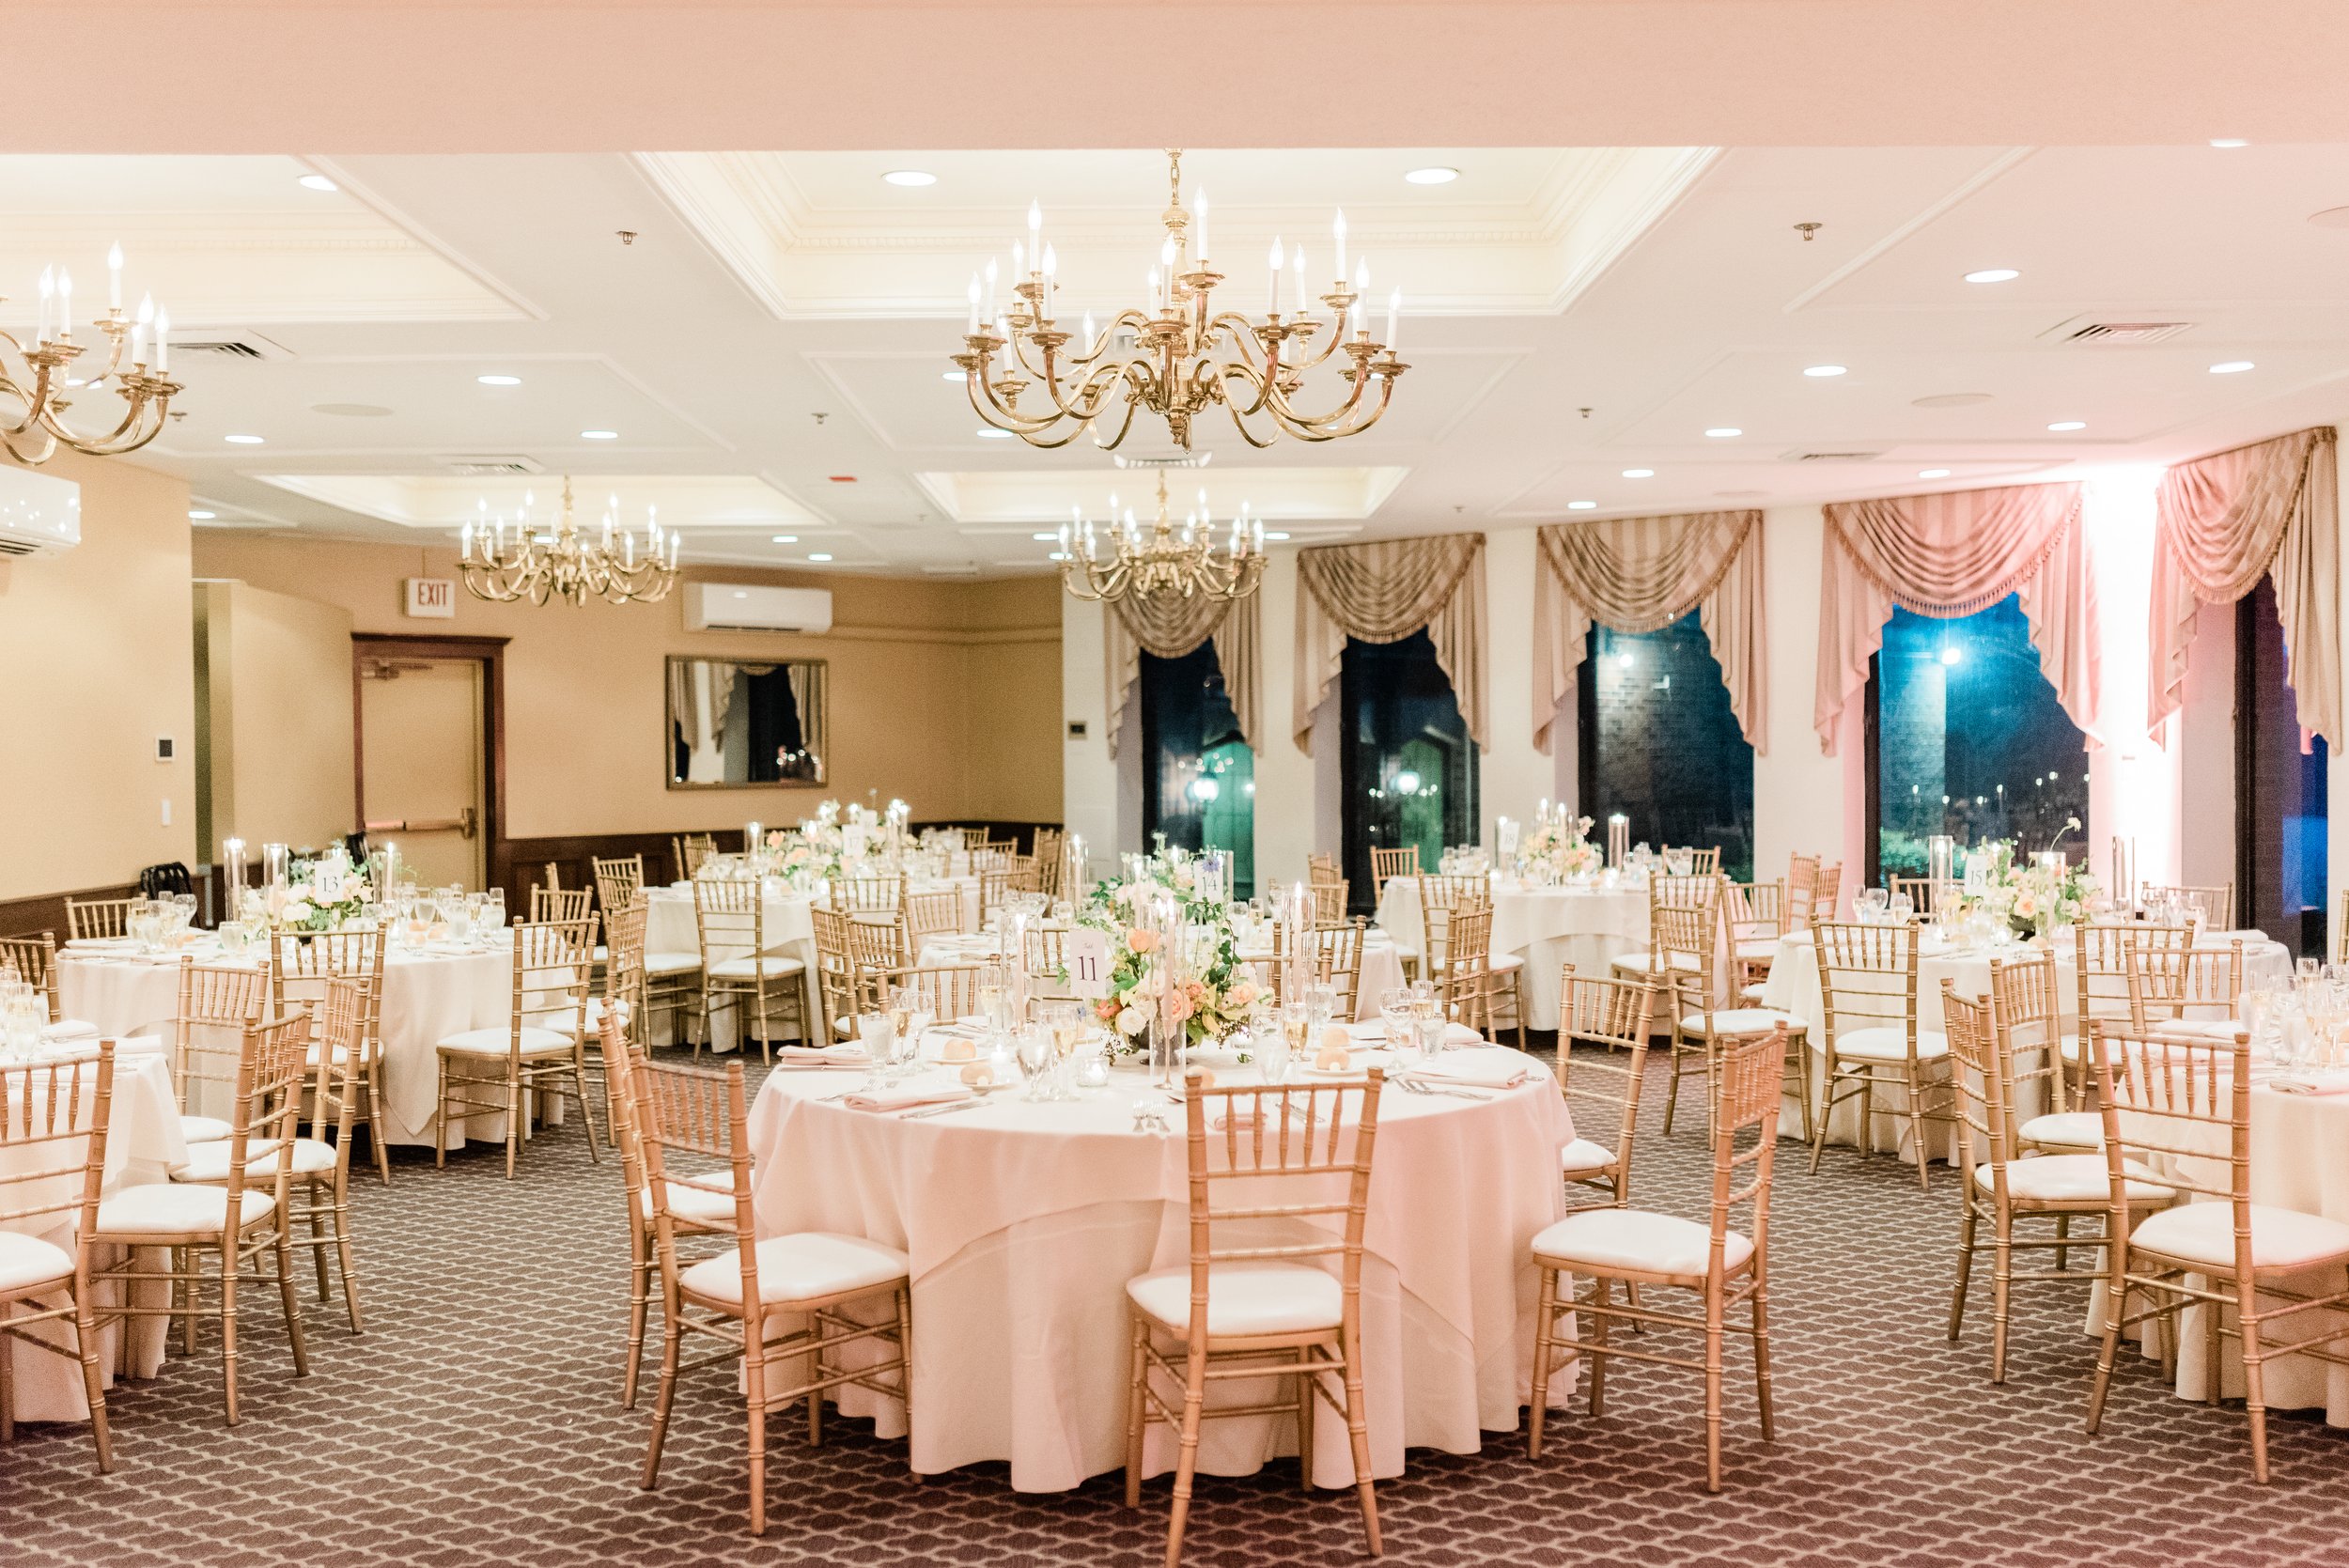 Pink-Champagne-Designs-Wedding-reception-inspiration-for-fall-weddings